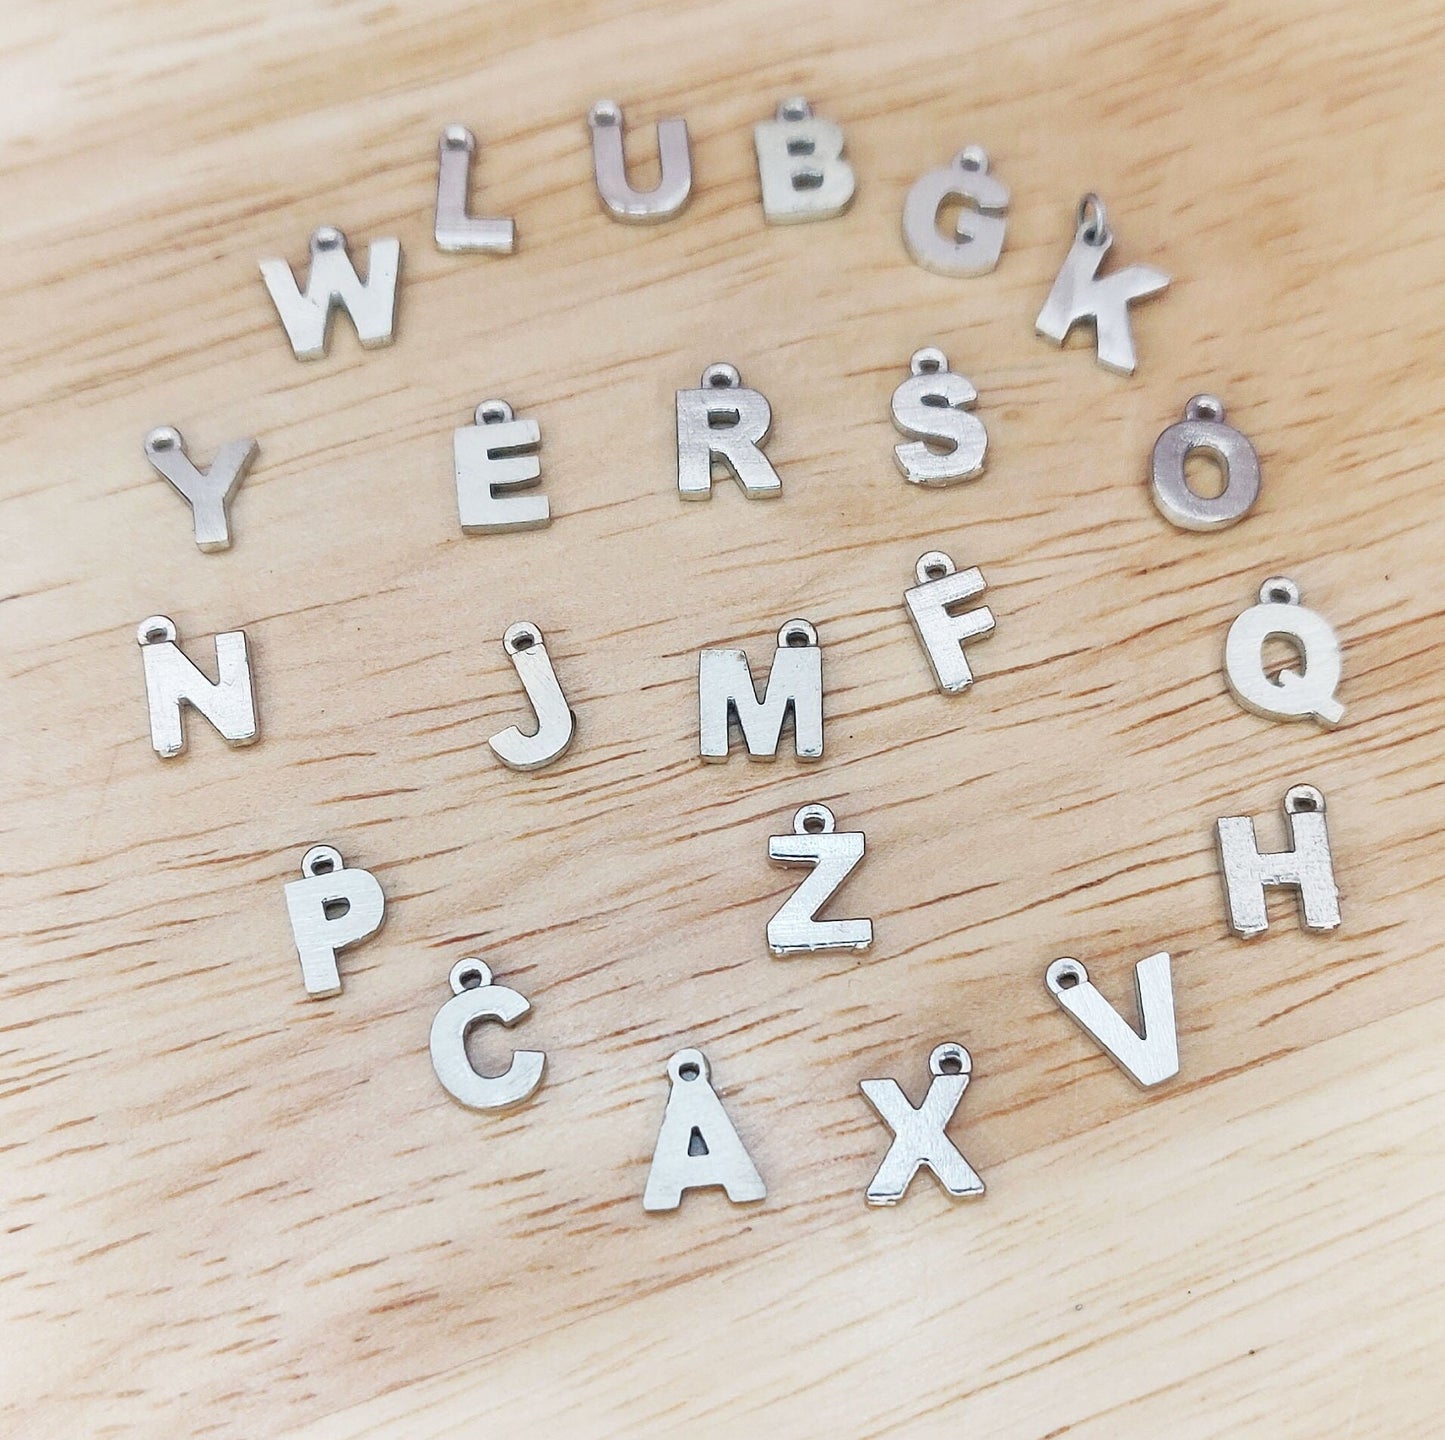 Silver or Gold Letter Charms. Single Bail Alphabet Pendants for Charm Bracelets or Initial or Name Necklaces.